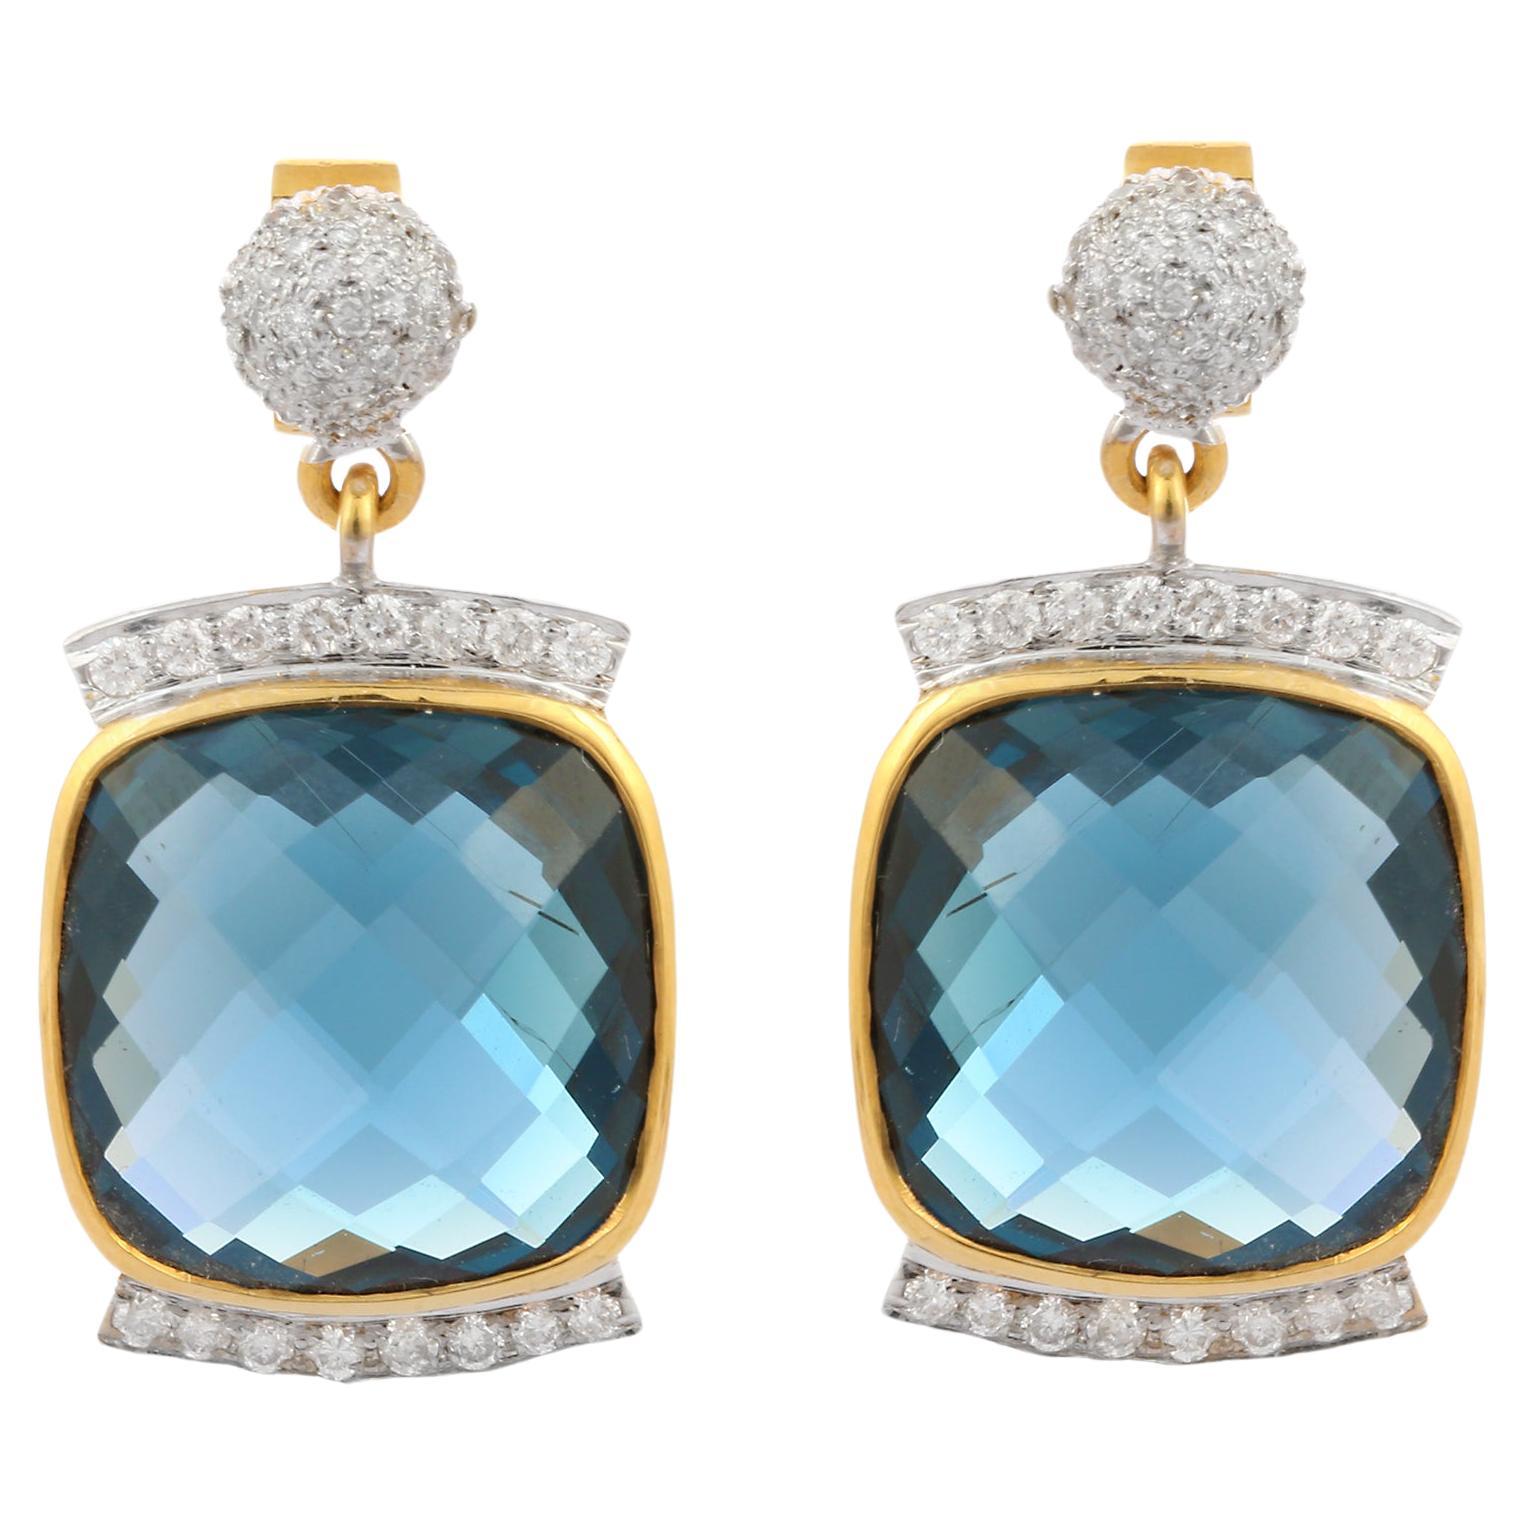 22.8 Ct Dark Blue Topaz Dangle Earrings with Diamonds Set in 14K Yellow Gold For Sale